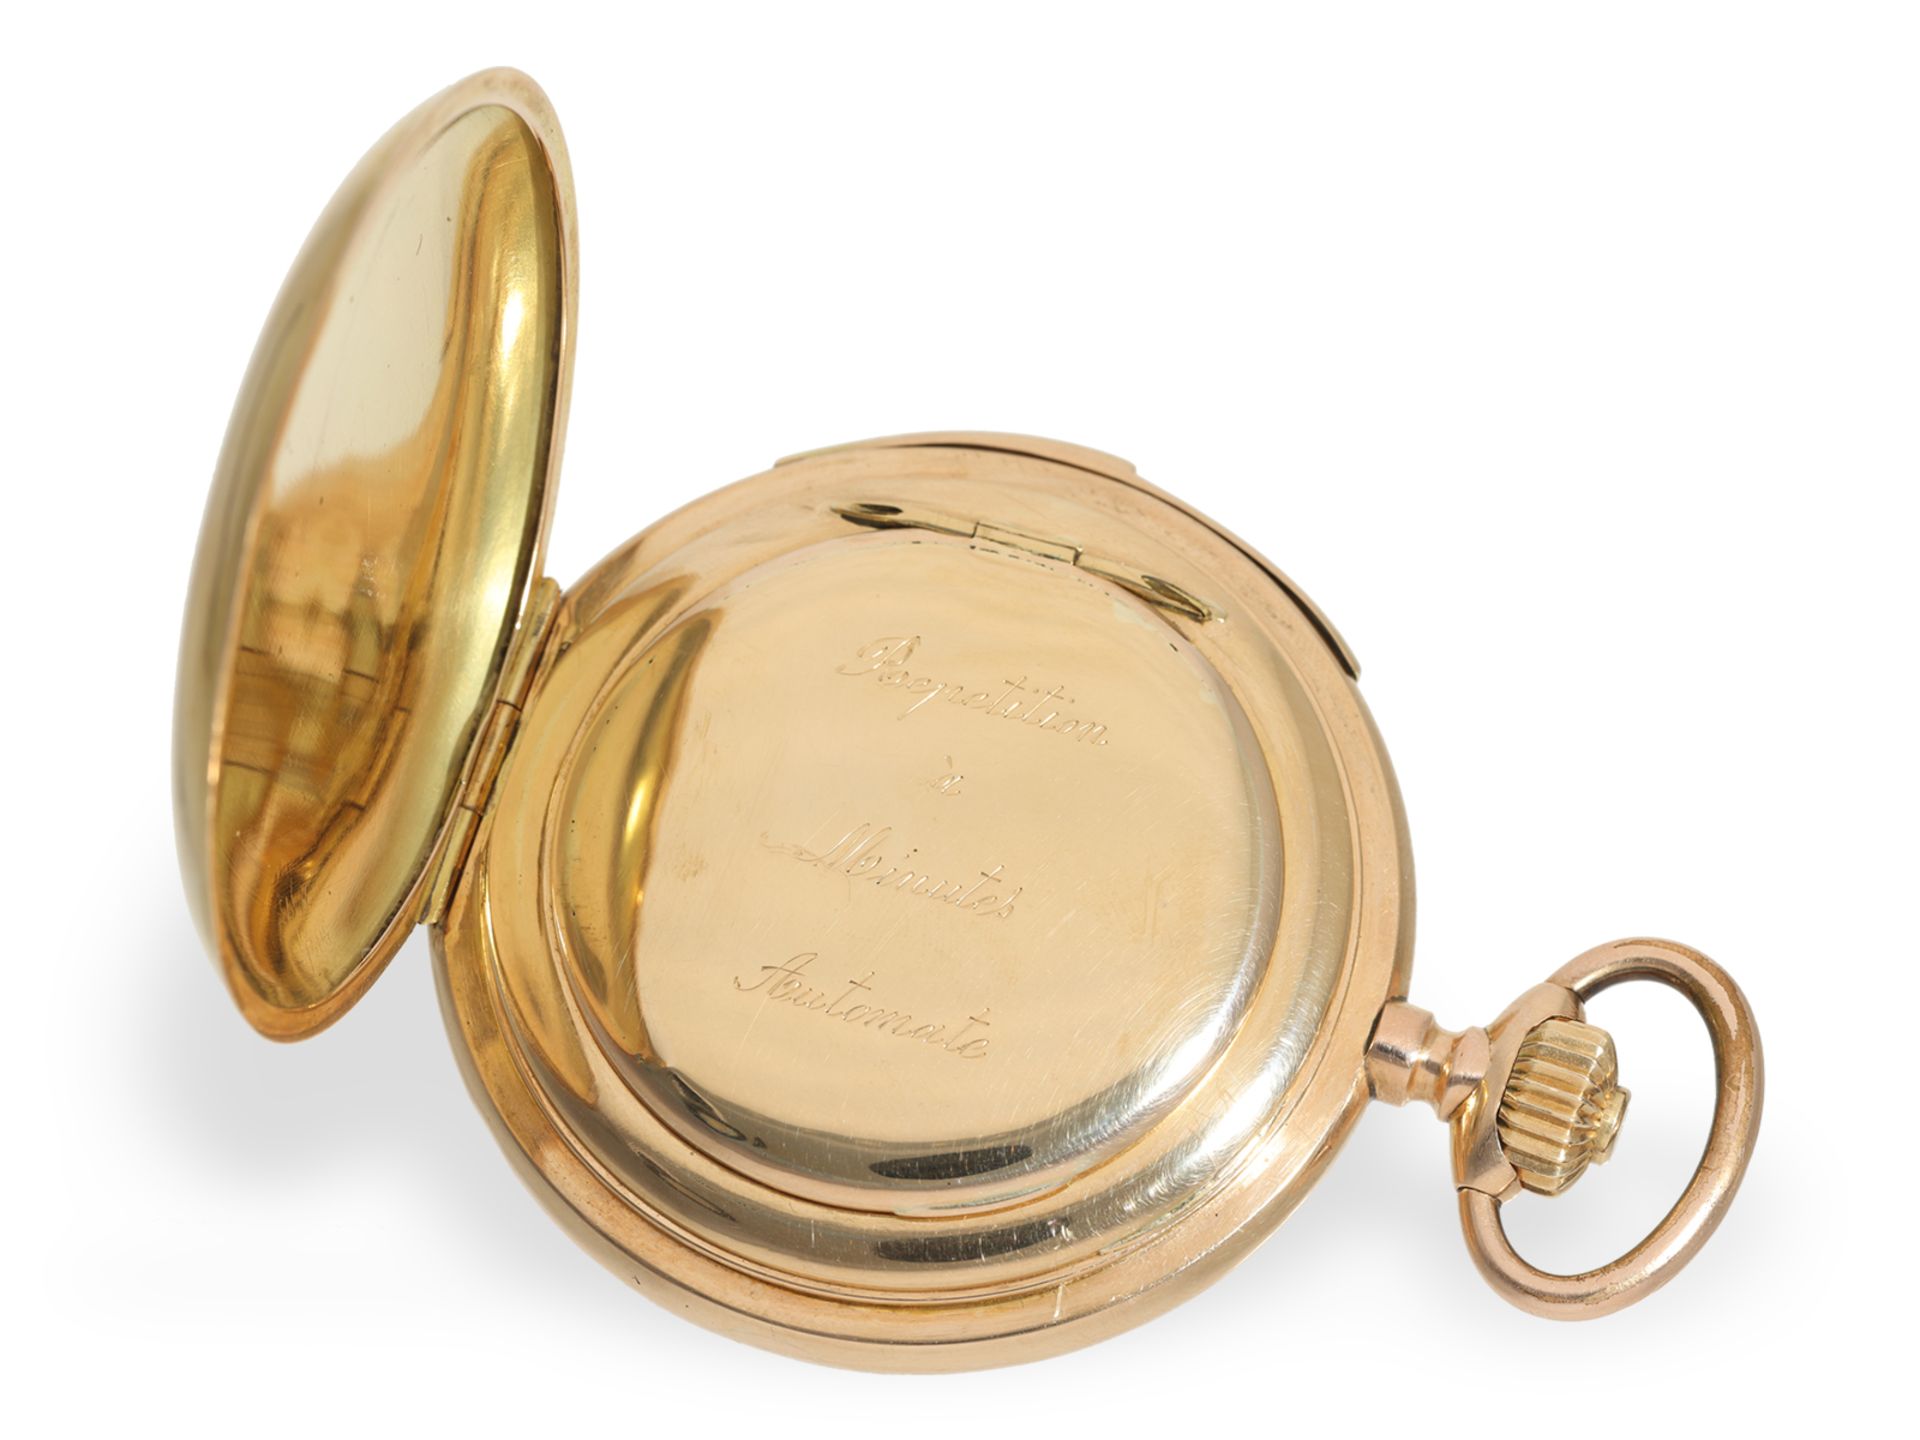 Pocket watch: heavy gold hunting case watch with minute repeater and erotic automaton, ca. 1900 - Image 6 of 6